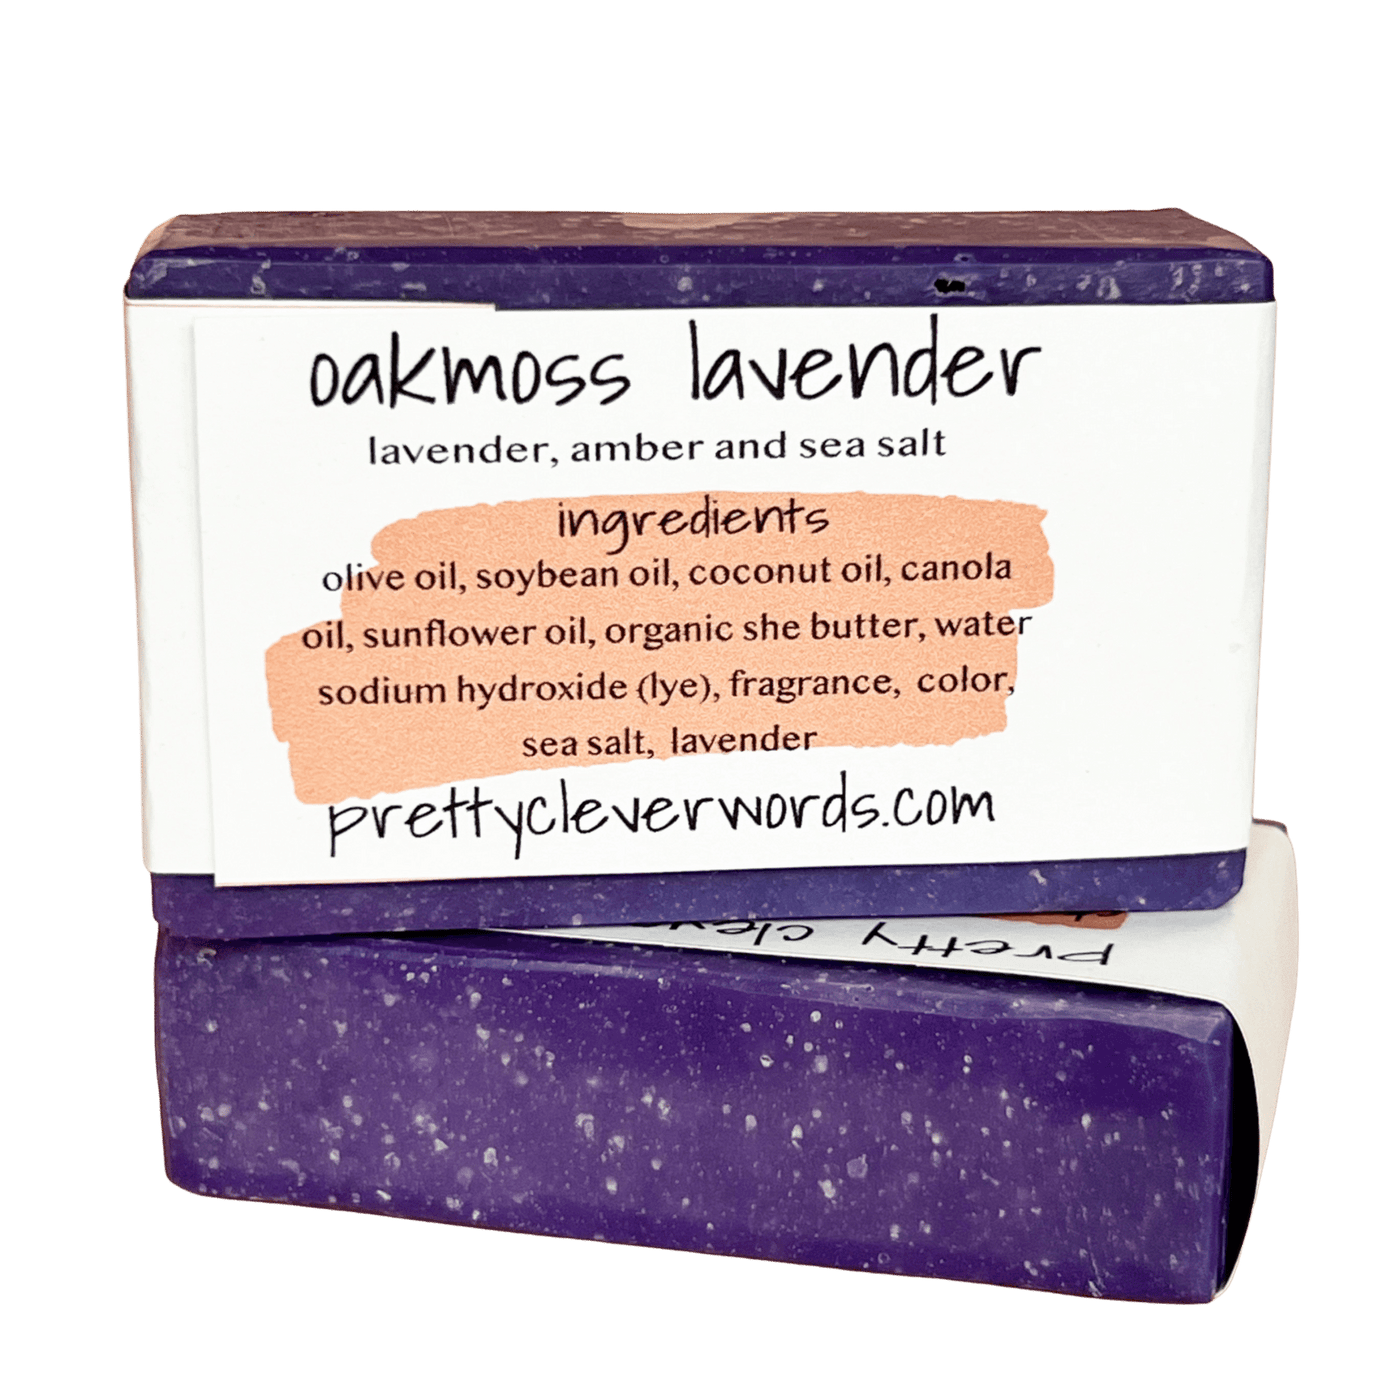 clever+clean oakmoss lavender - my life is based on a true story